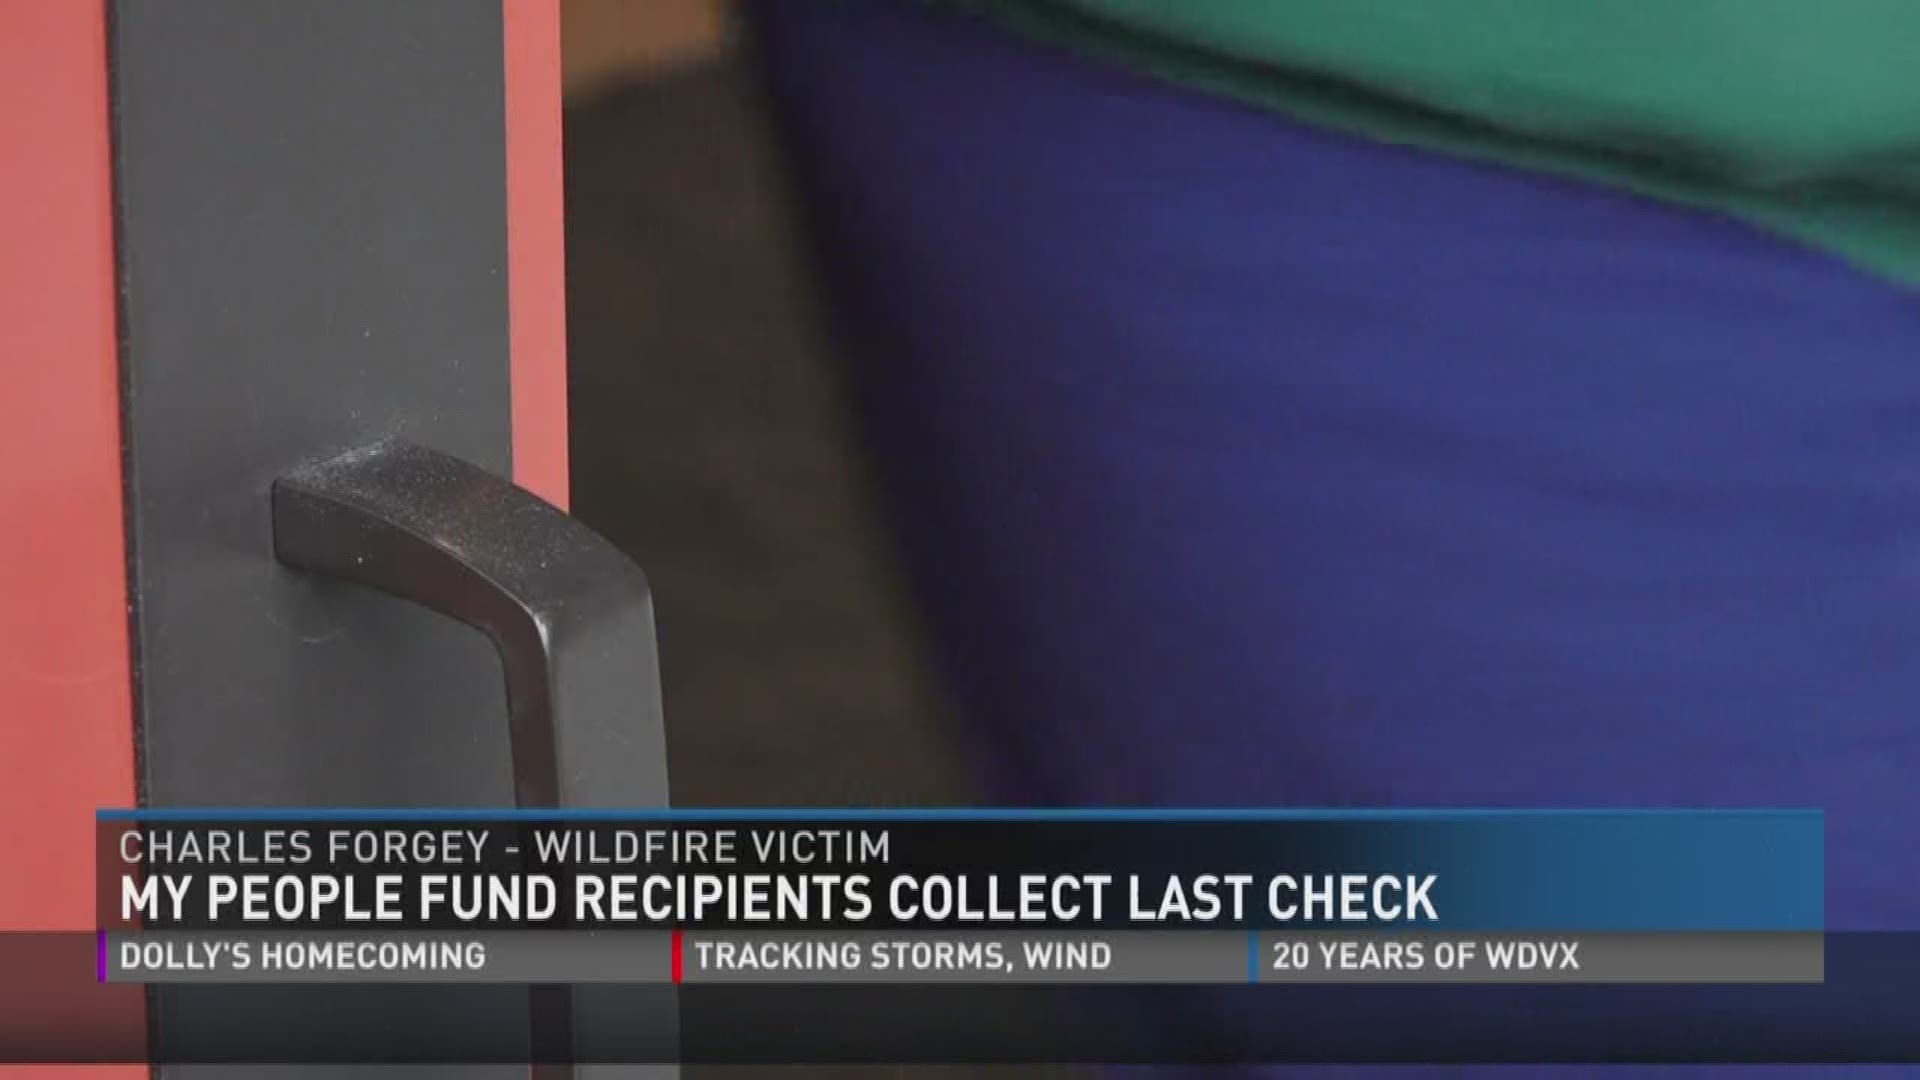 Wildfire victims received a special surprise when collecting their final "My People Fund" check